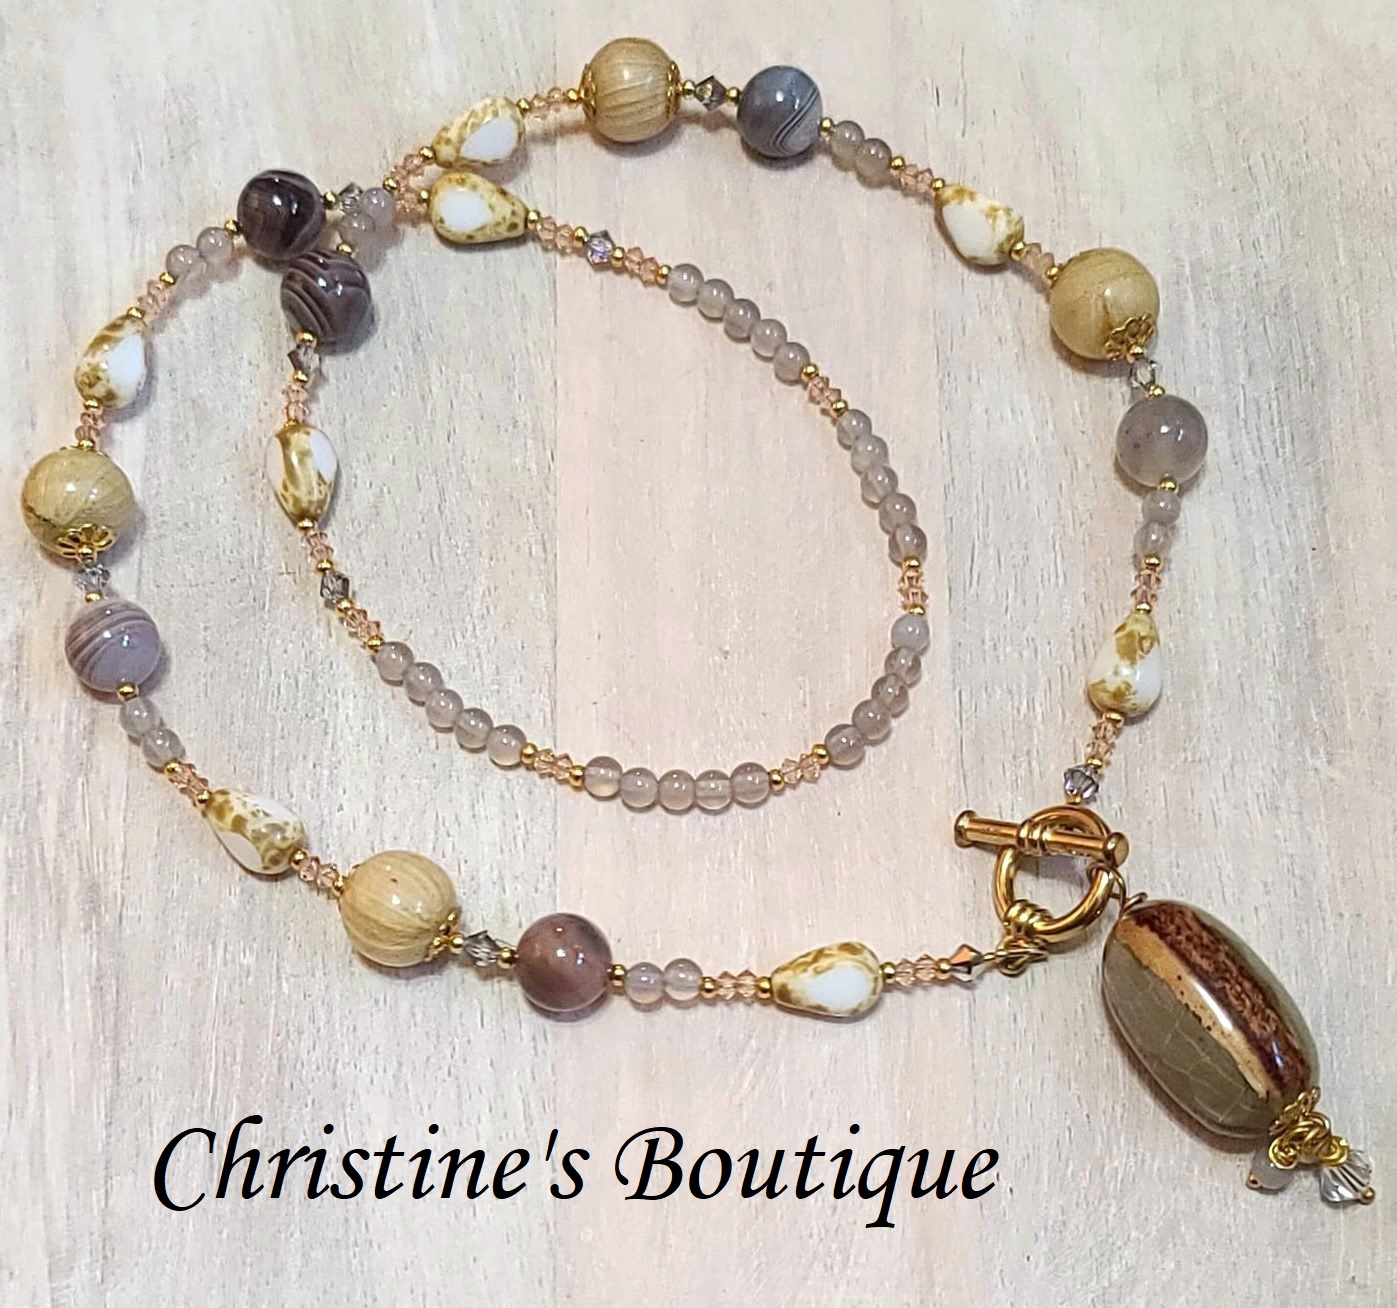 Gemstone lariat necklace, agate gemstone, crystals, handcrafted - Click Image to Close